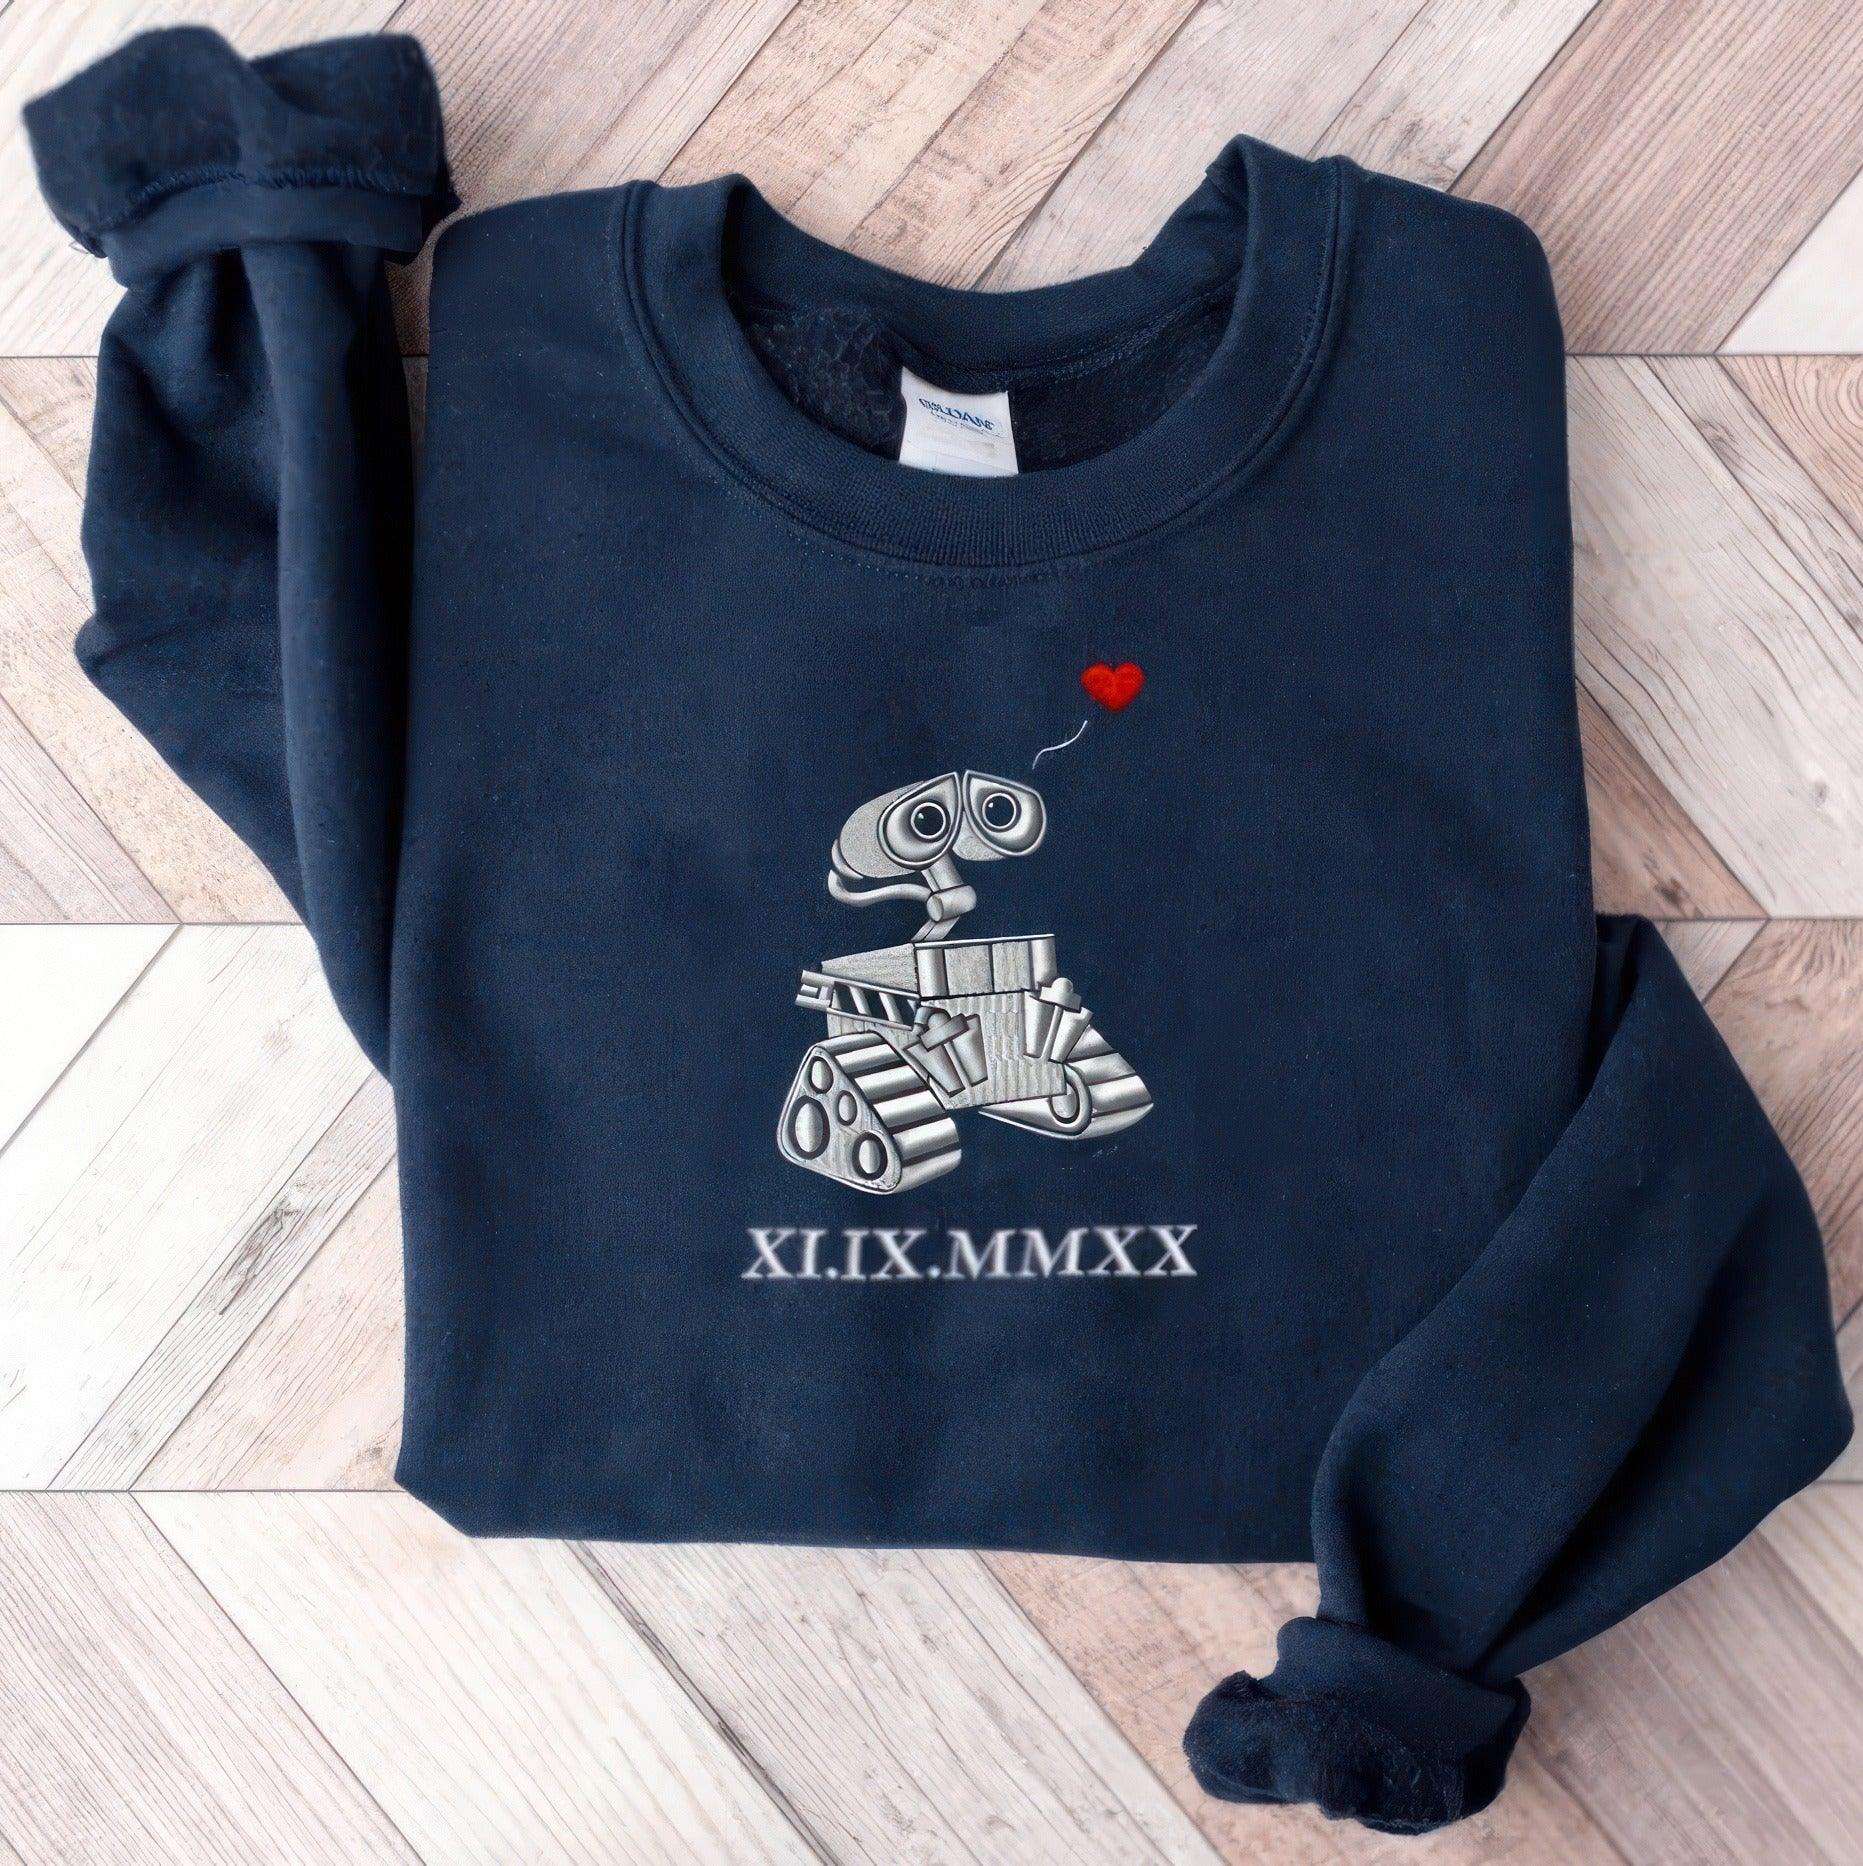 Custom Embroidered Sweatshirts, Funny Matching Sweatshirts For Friends, Wall E and Eve Couple Matching Embroidered Sweatshirt